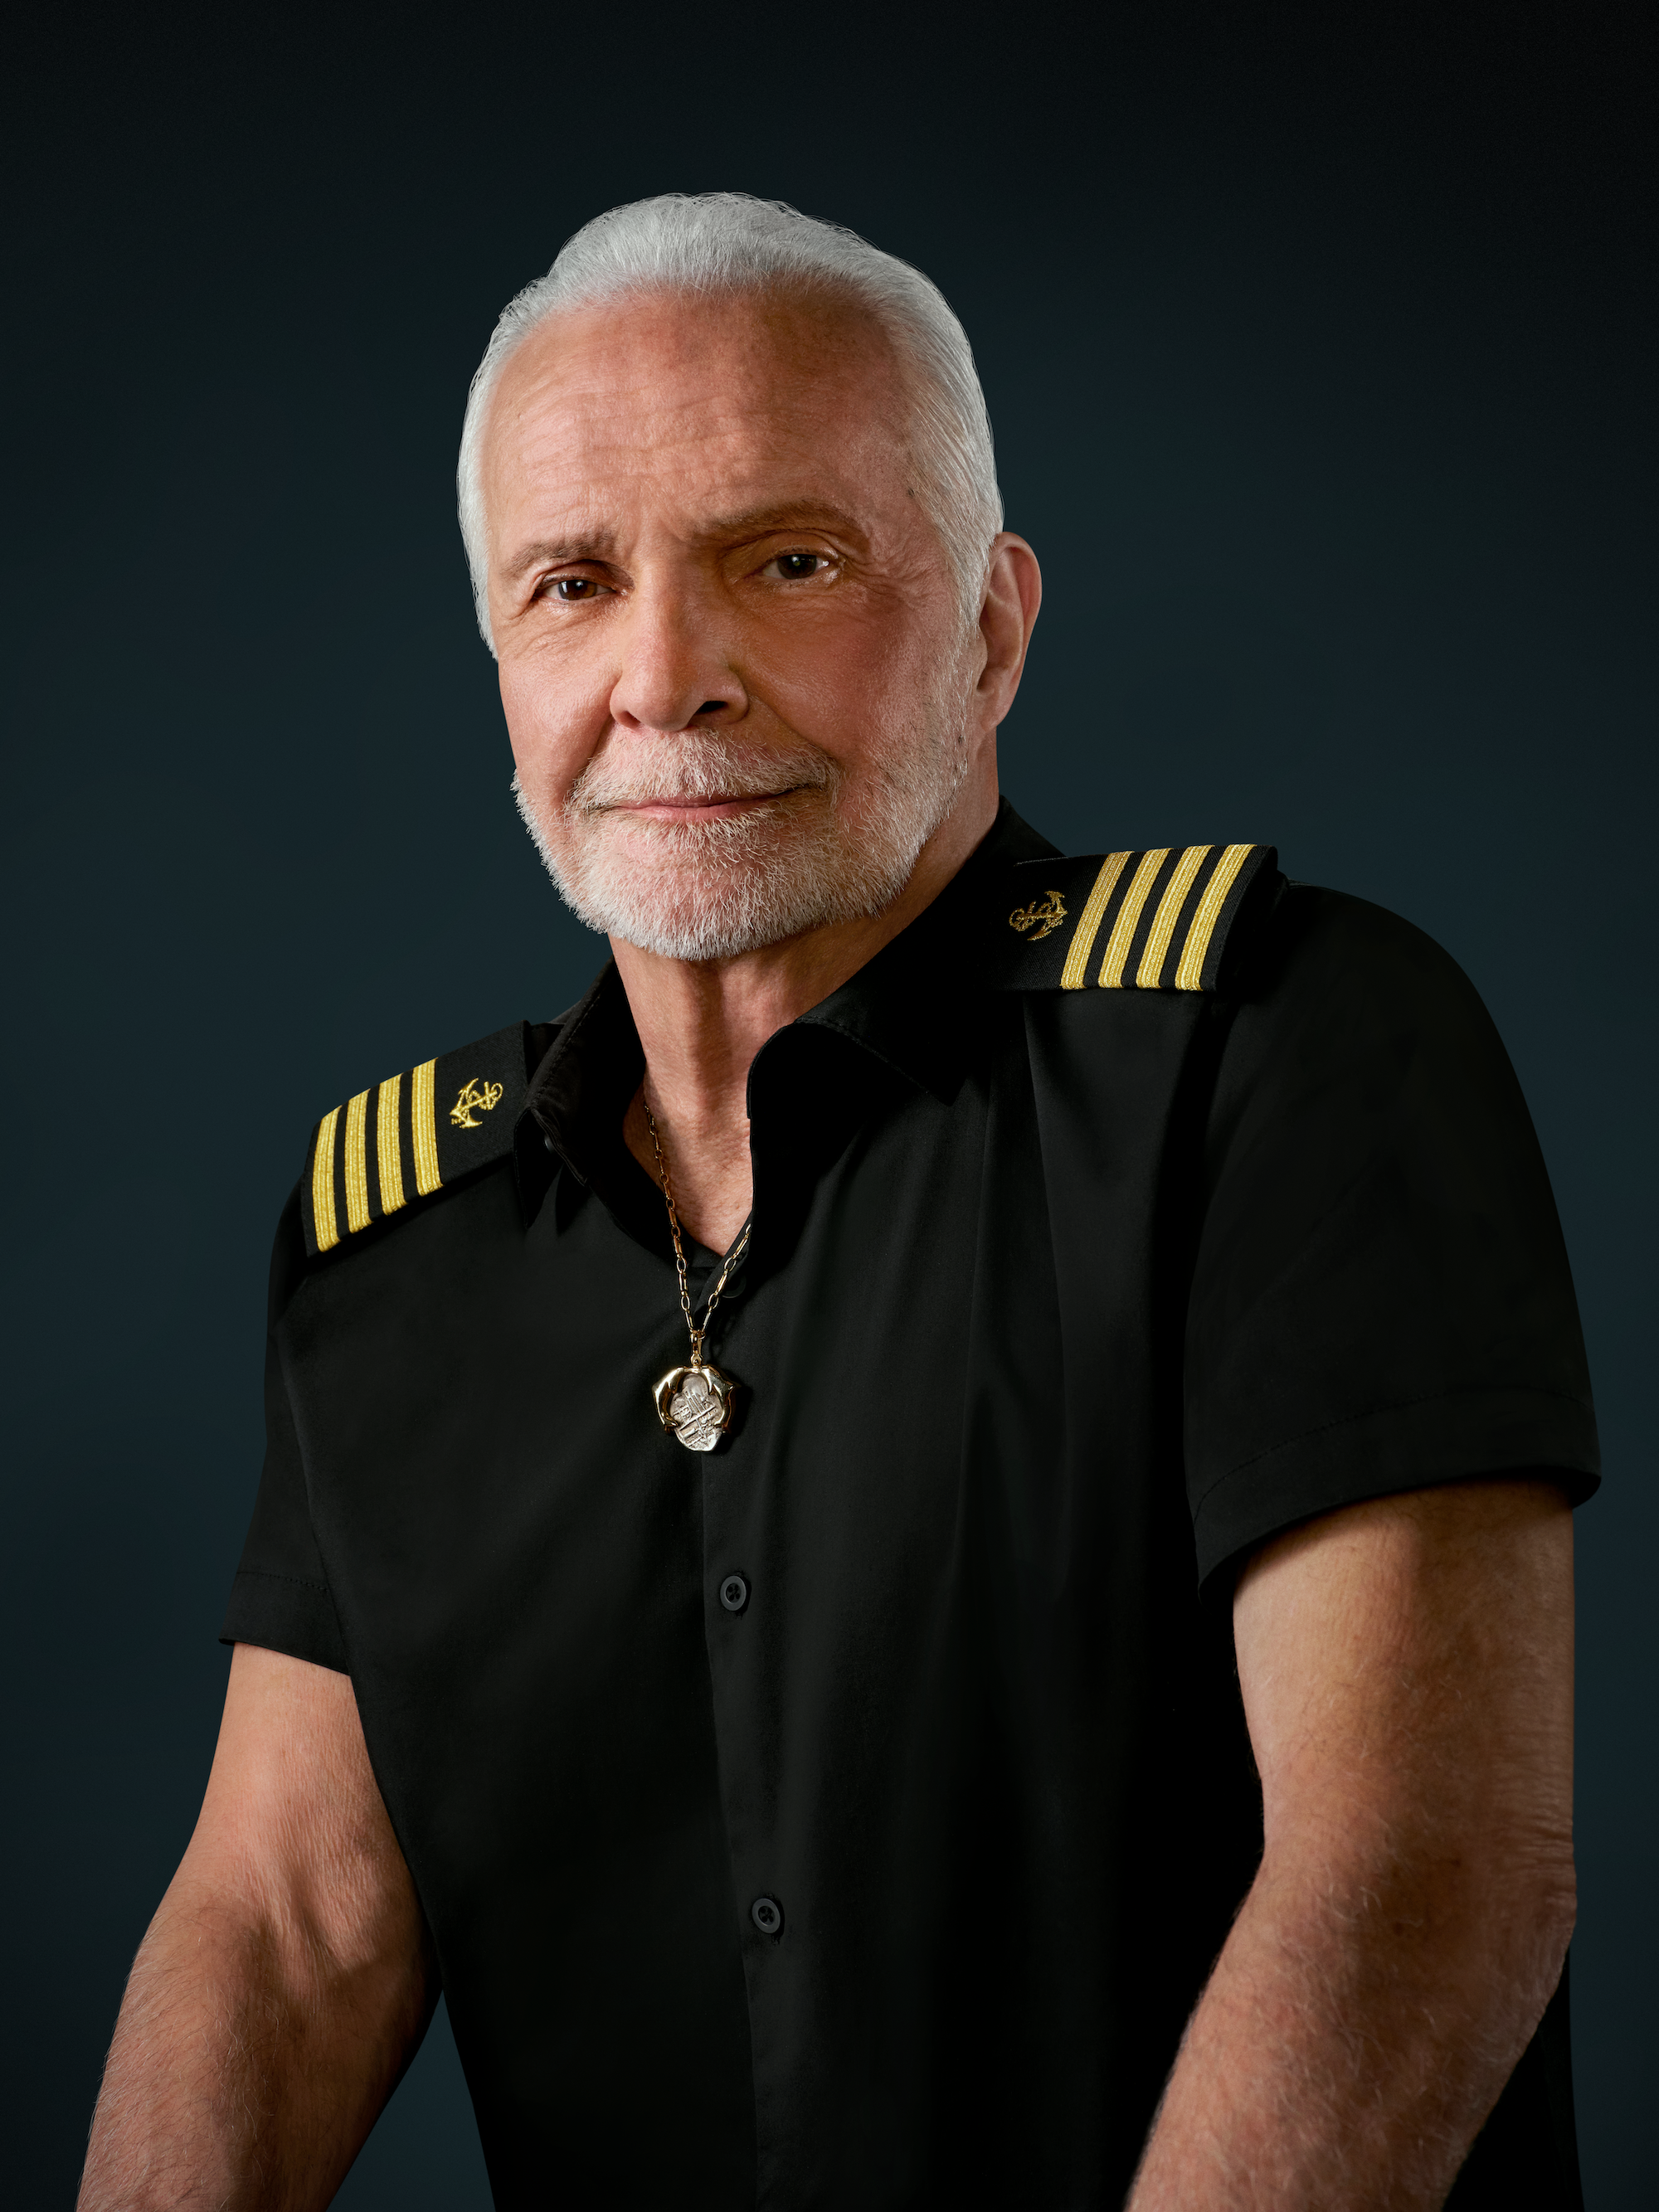 Captain Lee’s Next TV Job After ‘Below Deck’ Involves Murder on the High Seas in ‘Deadly Waters’